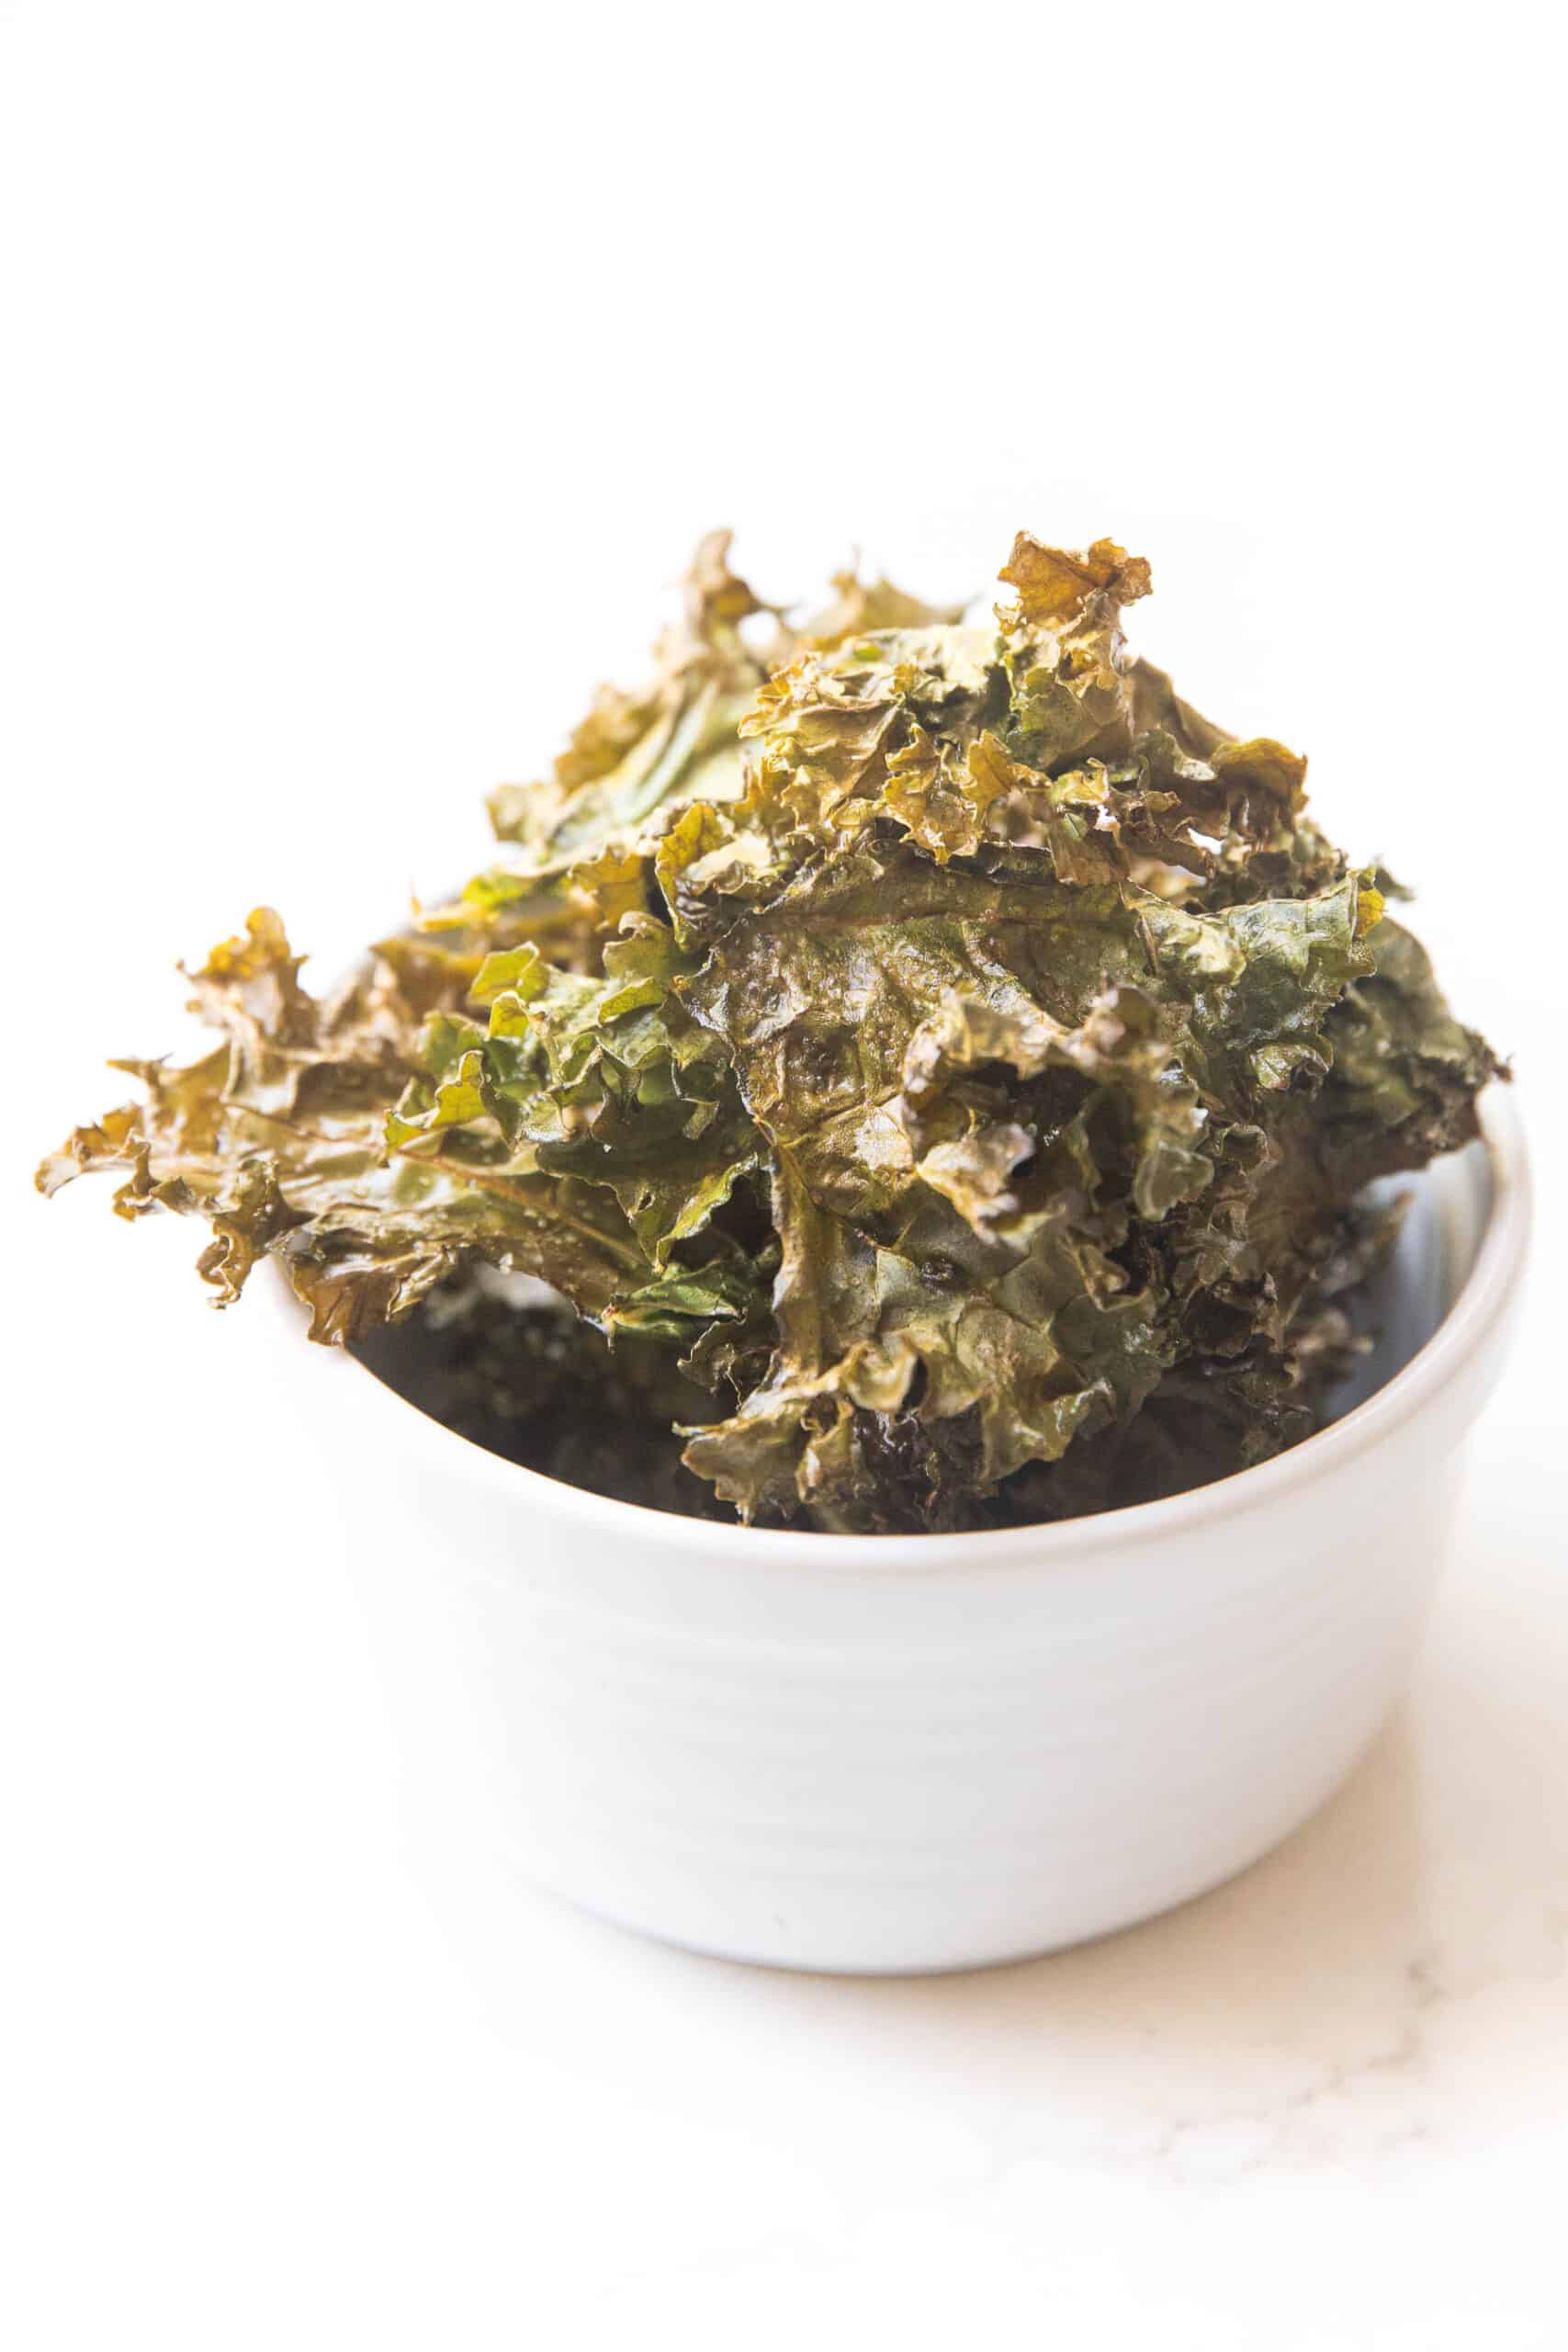 crispy kale chips in a white bowl in a white background